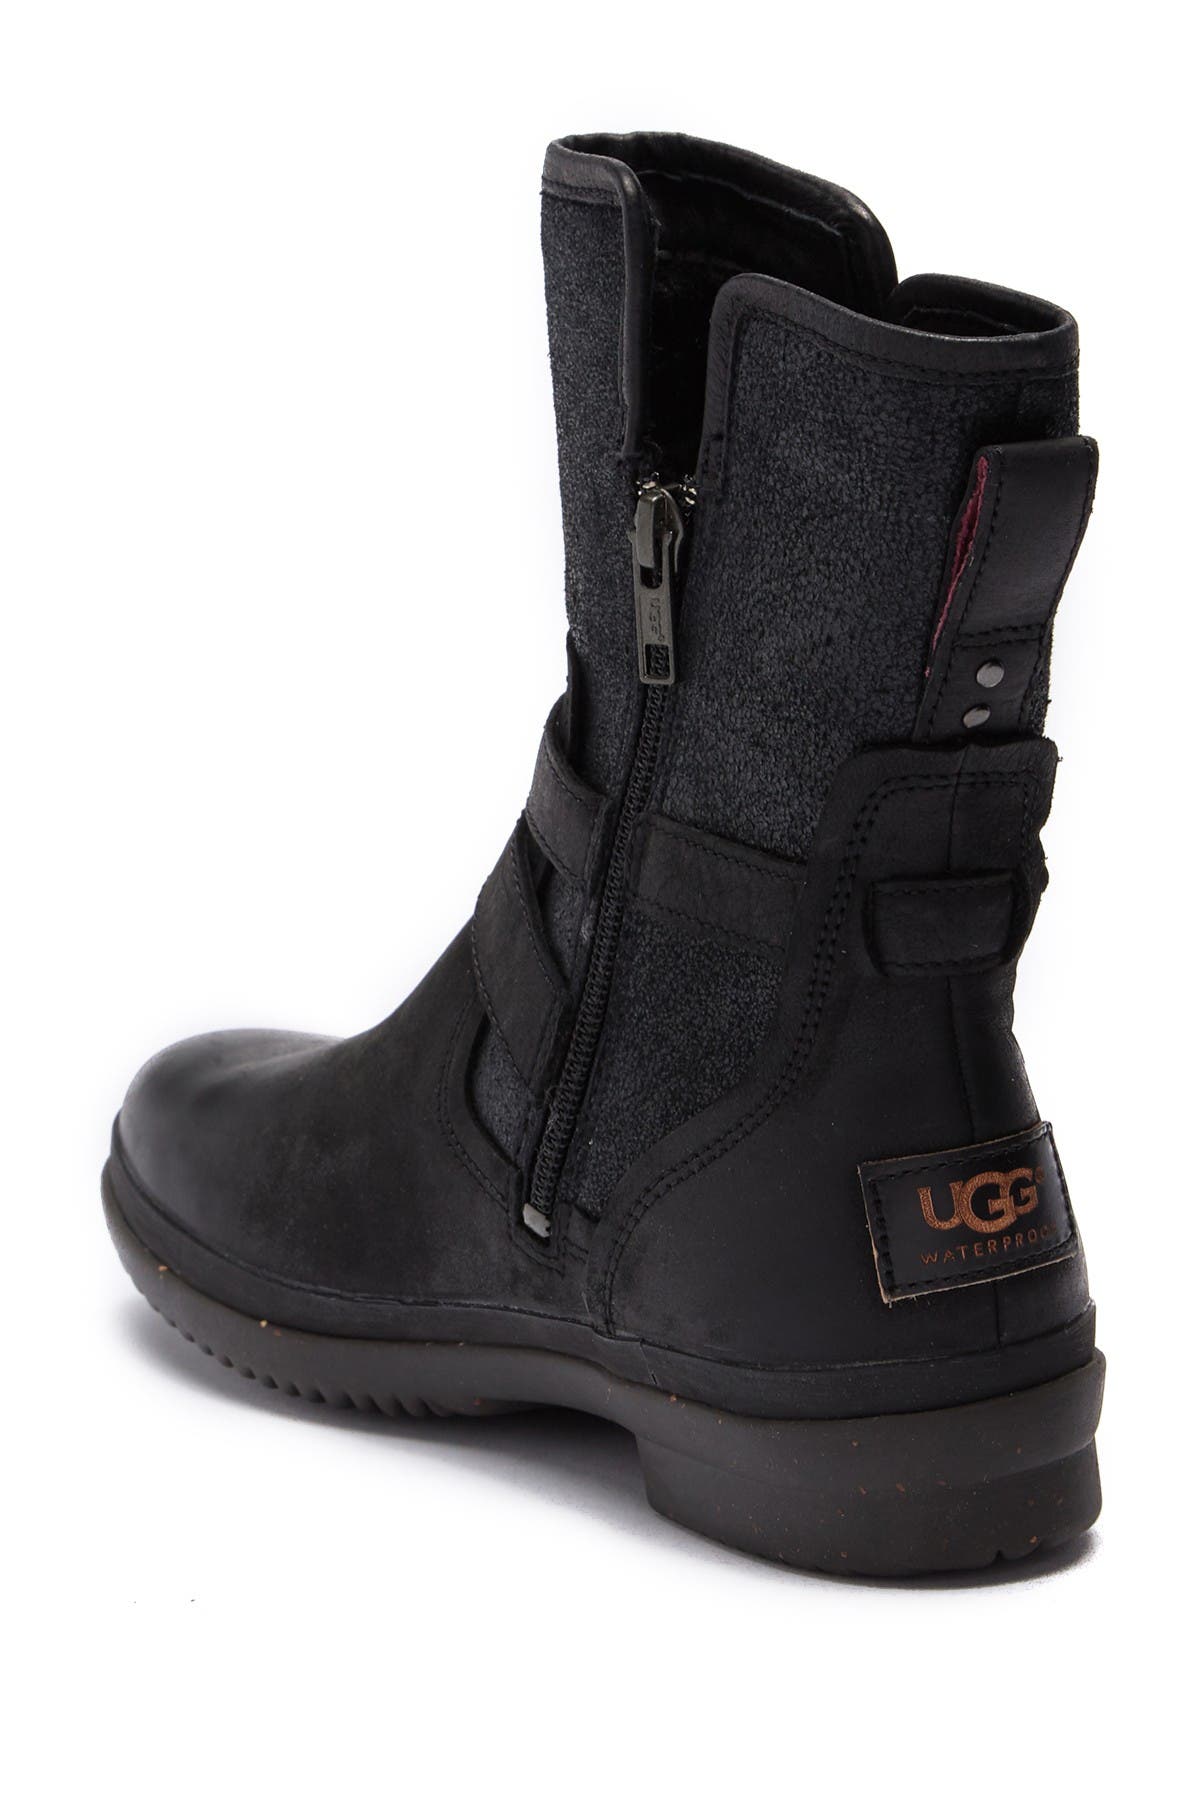 ugg simmens boot black size 9